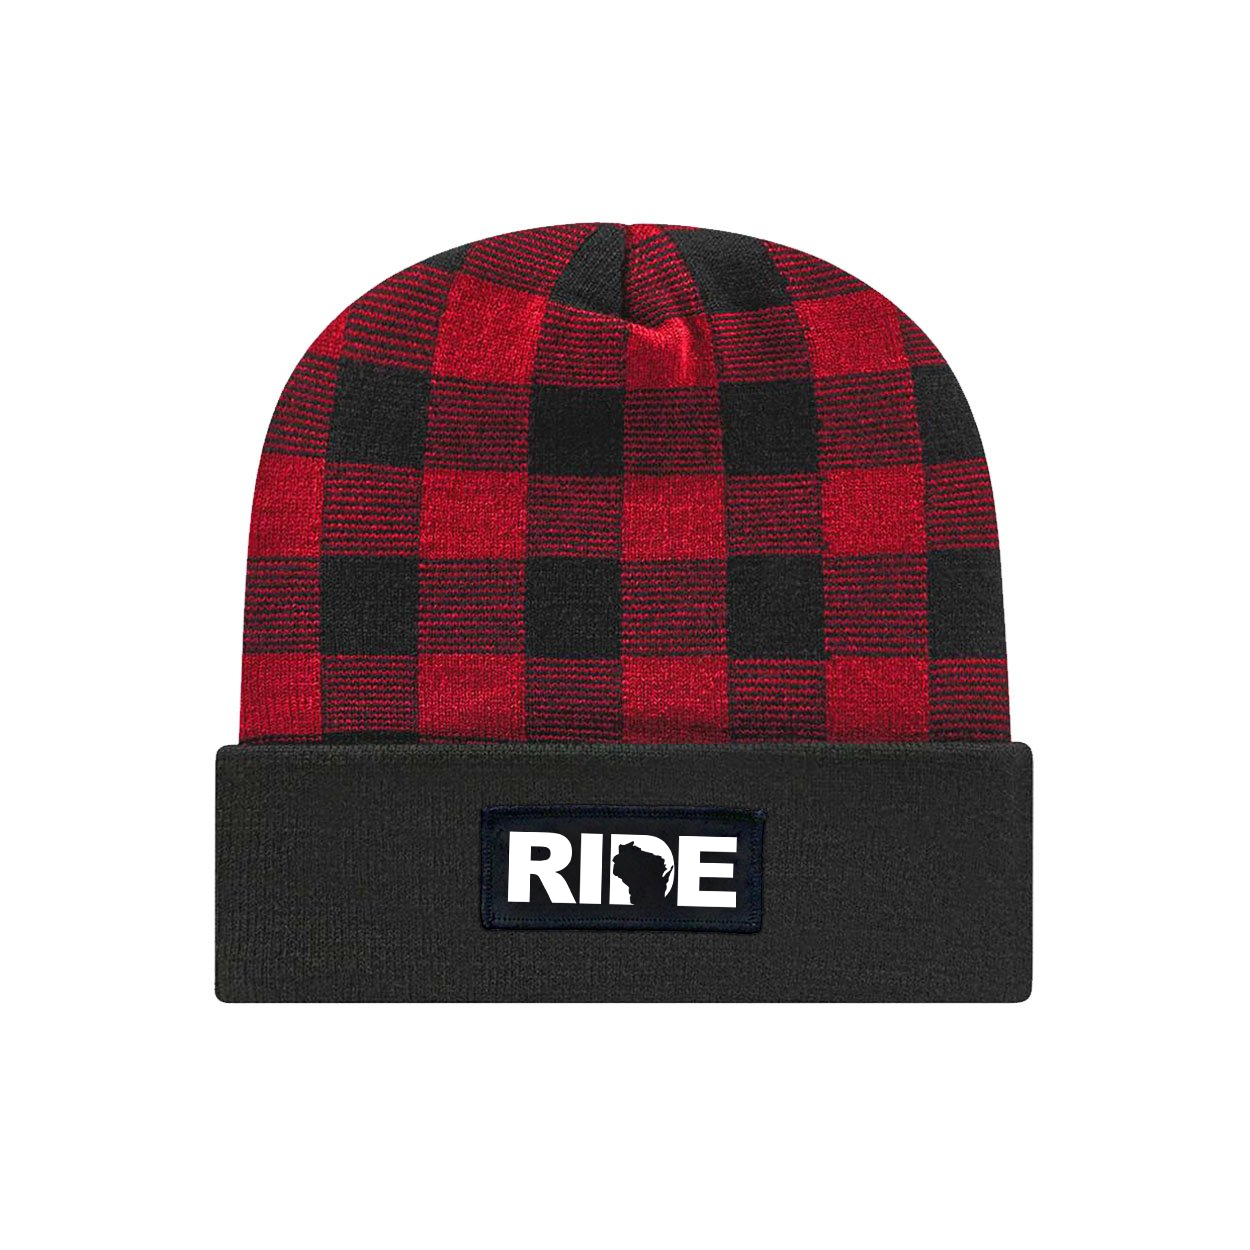 Ride Wisconsin Night Out Woven Patch Roll Up Plaid Beanie Black/True Red (White Logo)